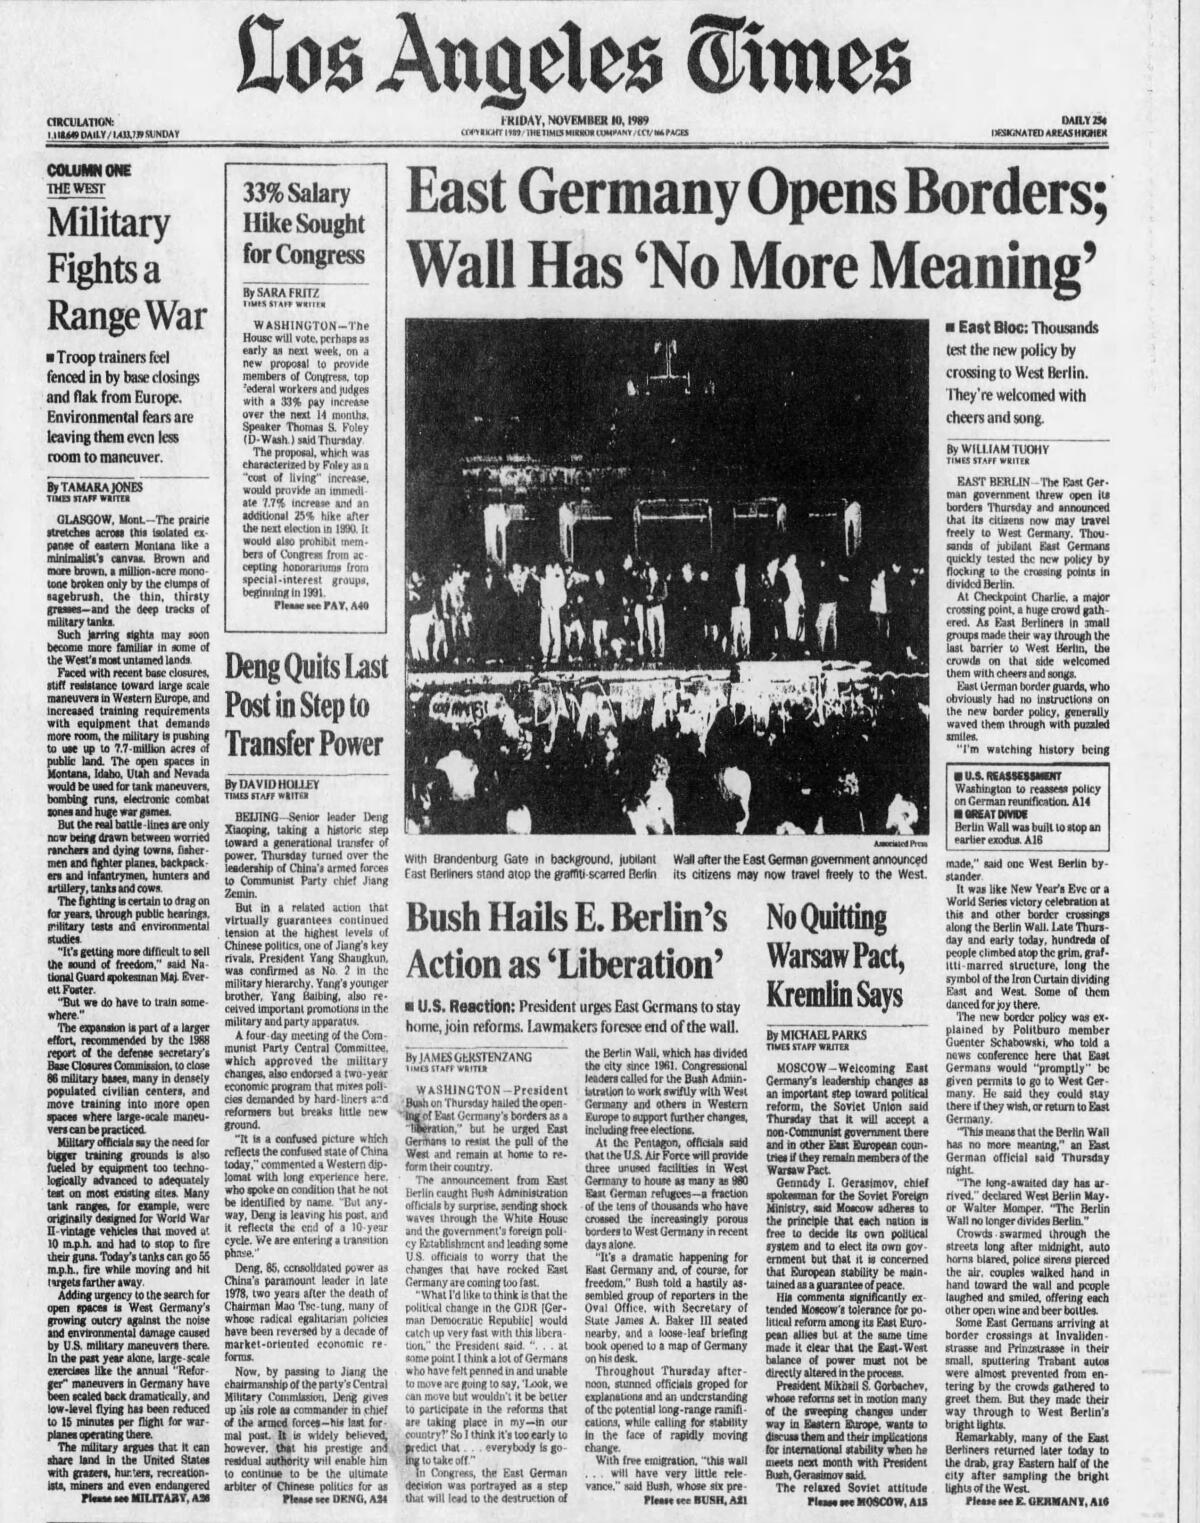 An L.A. Times newspaper clipping about the fall of the Berlin Wall